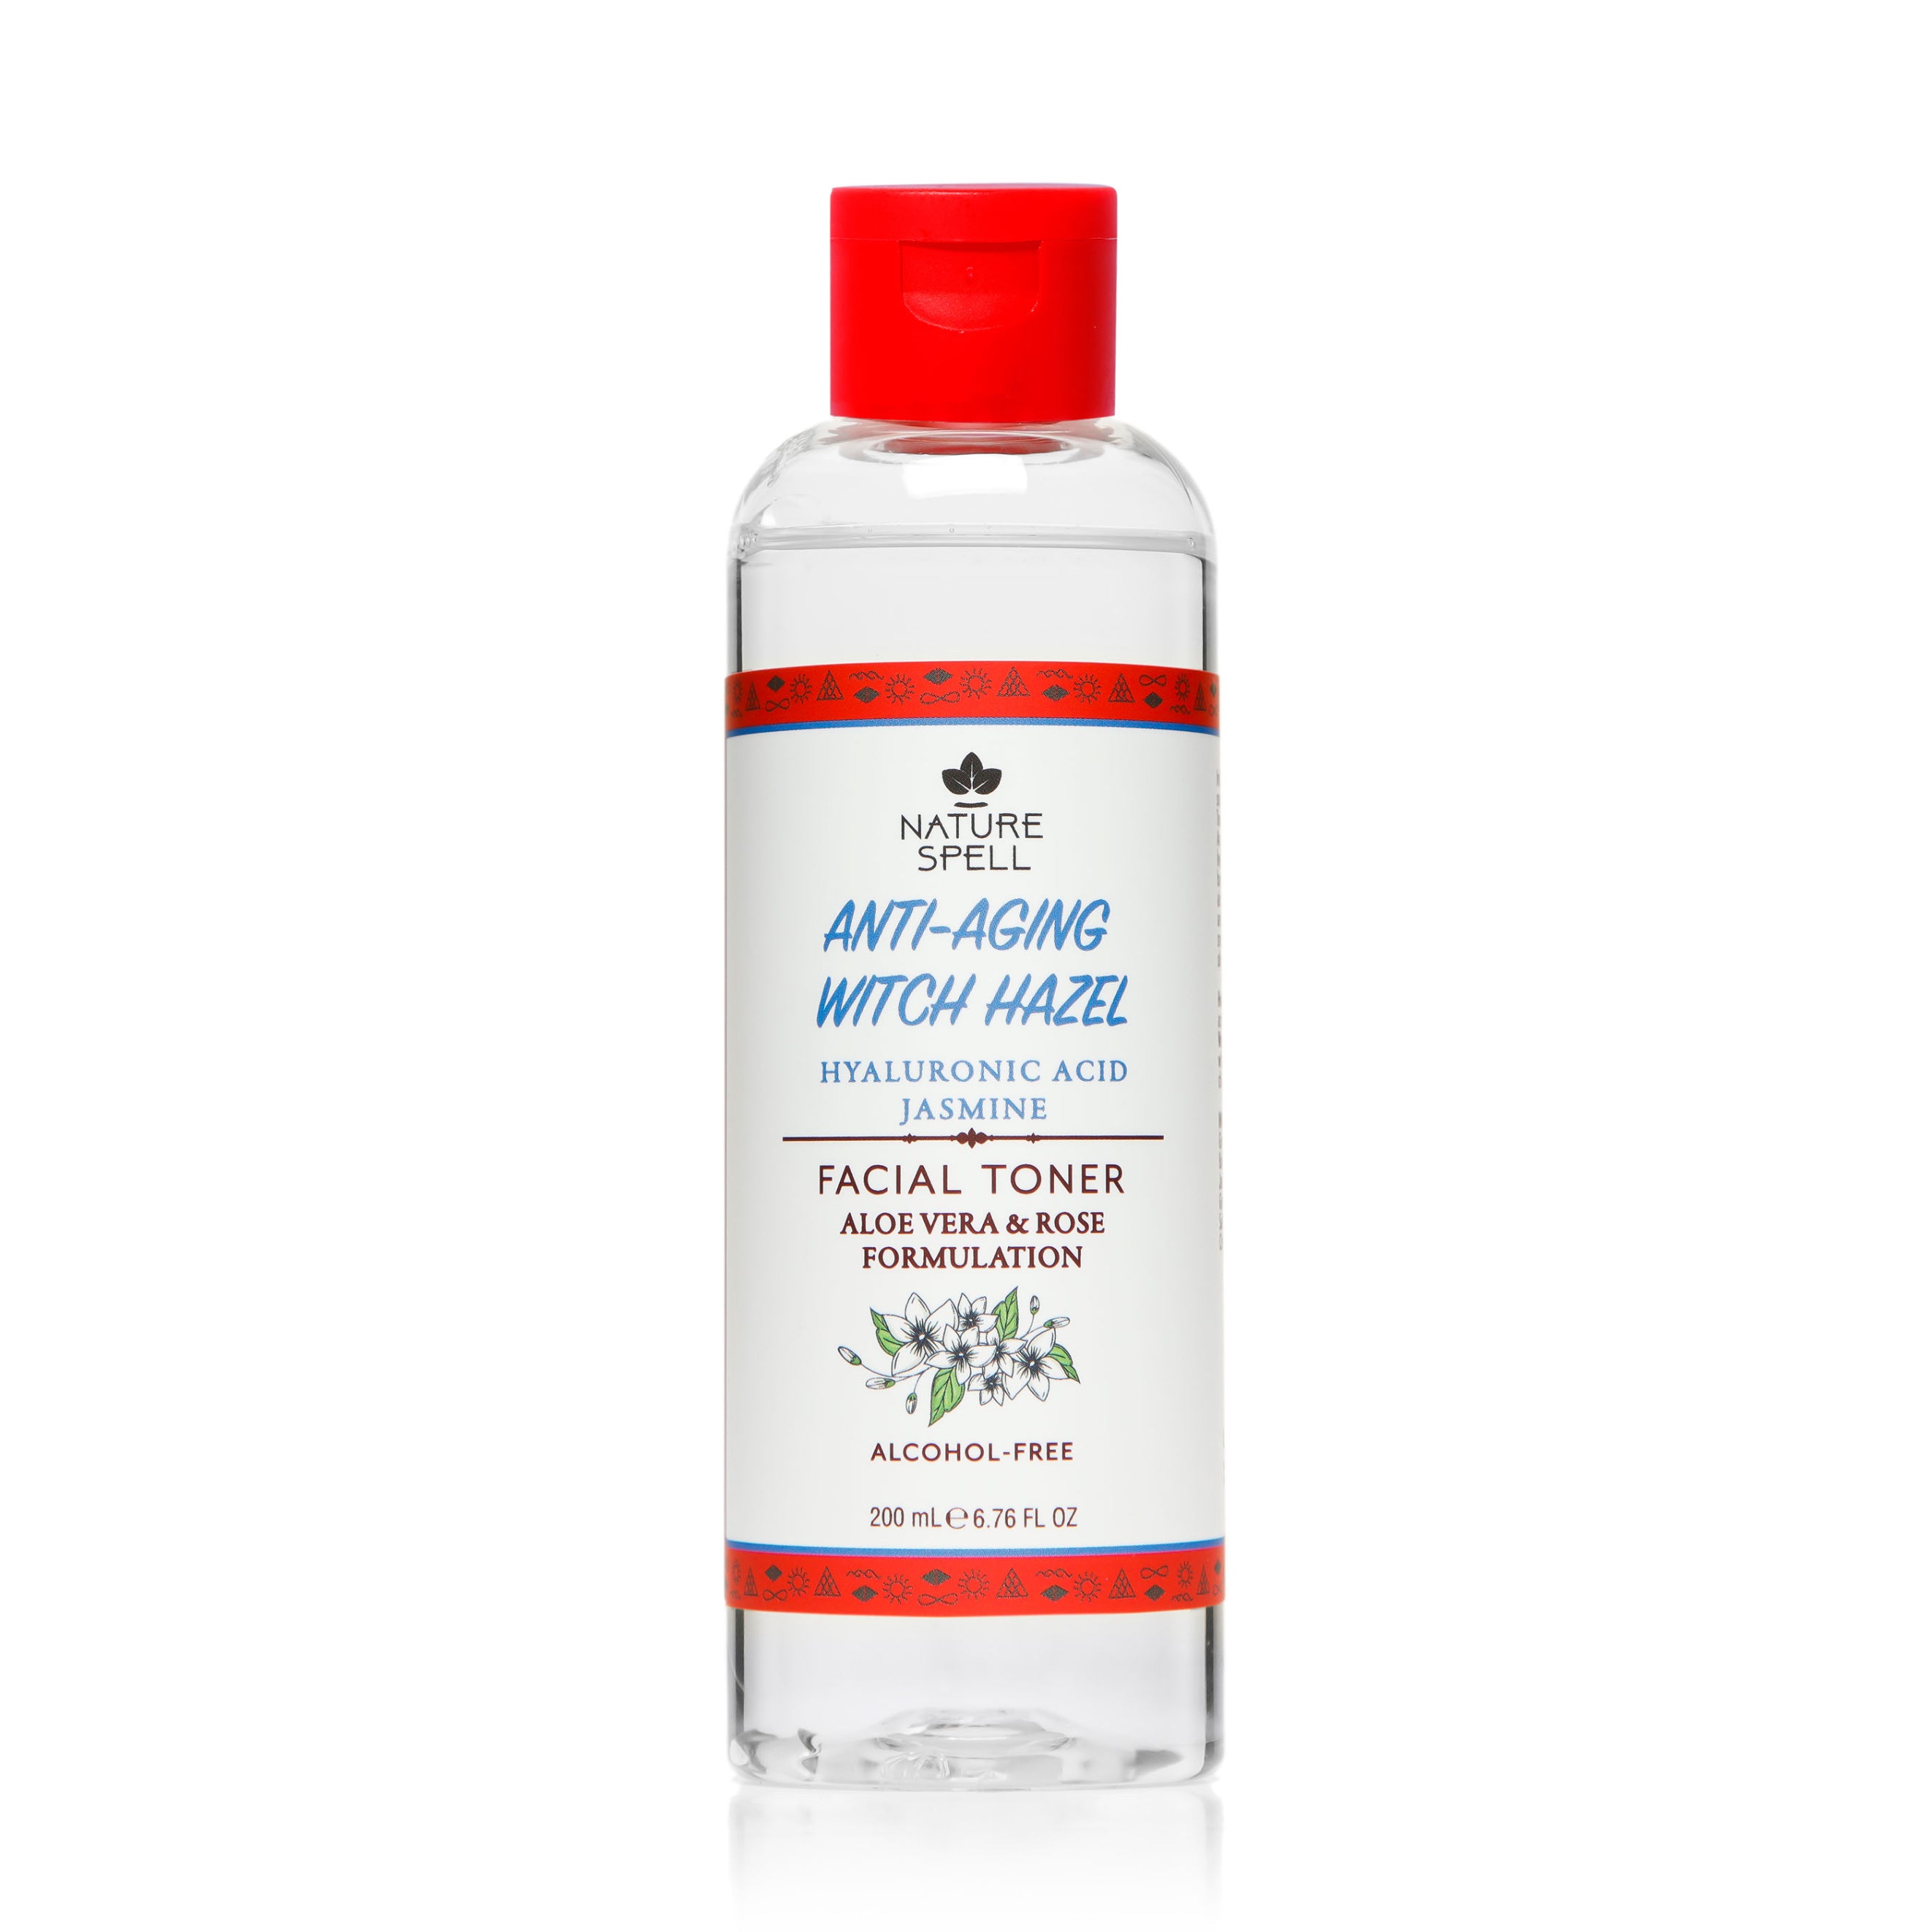 Anti Aging Witch Hazel Face Toner with Hyaluronic Acid